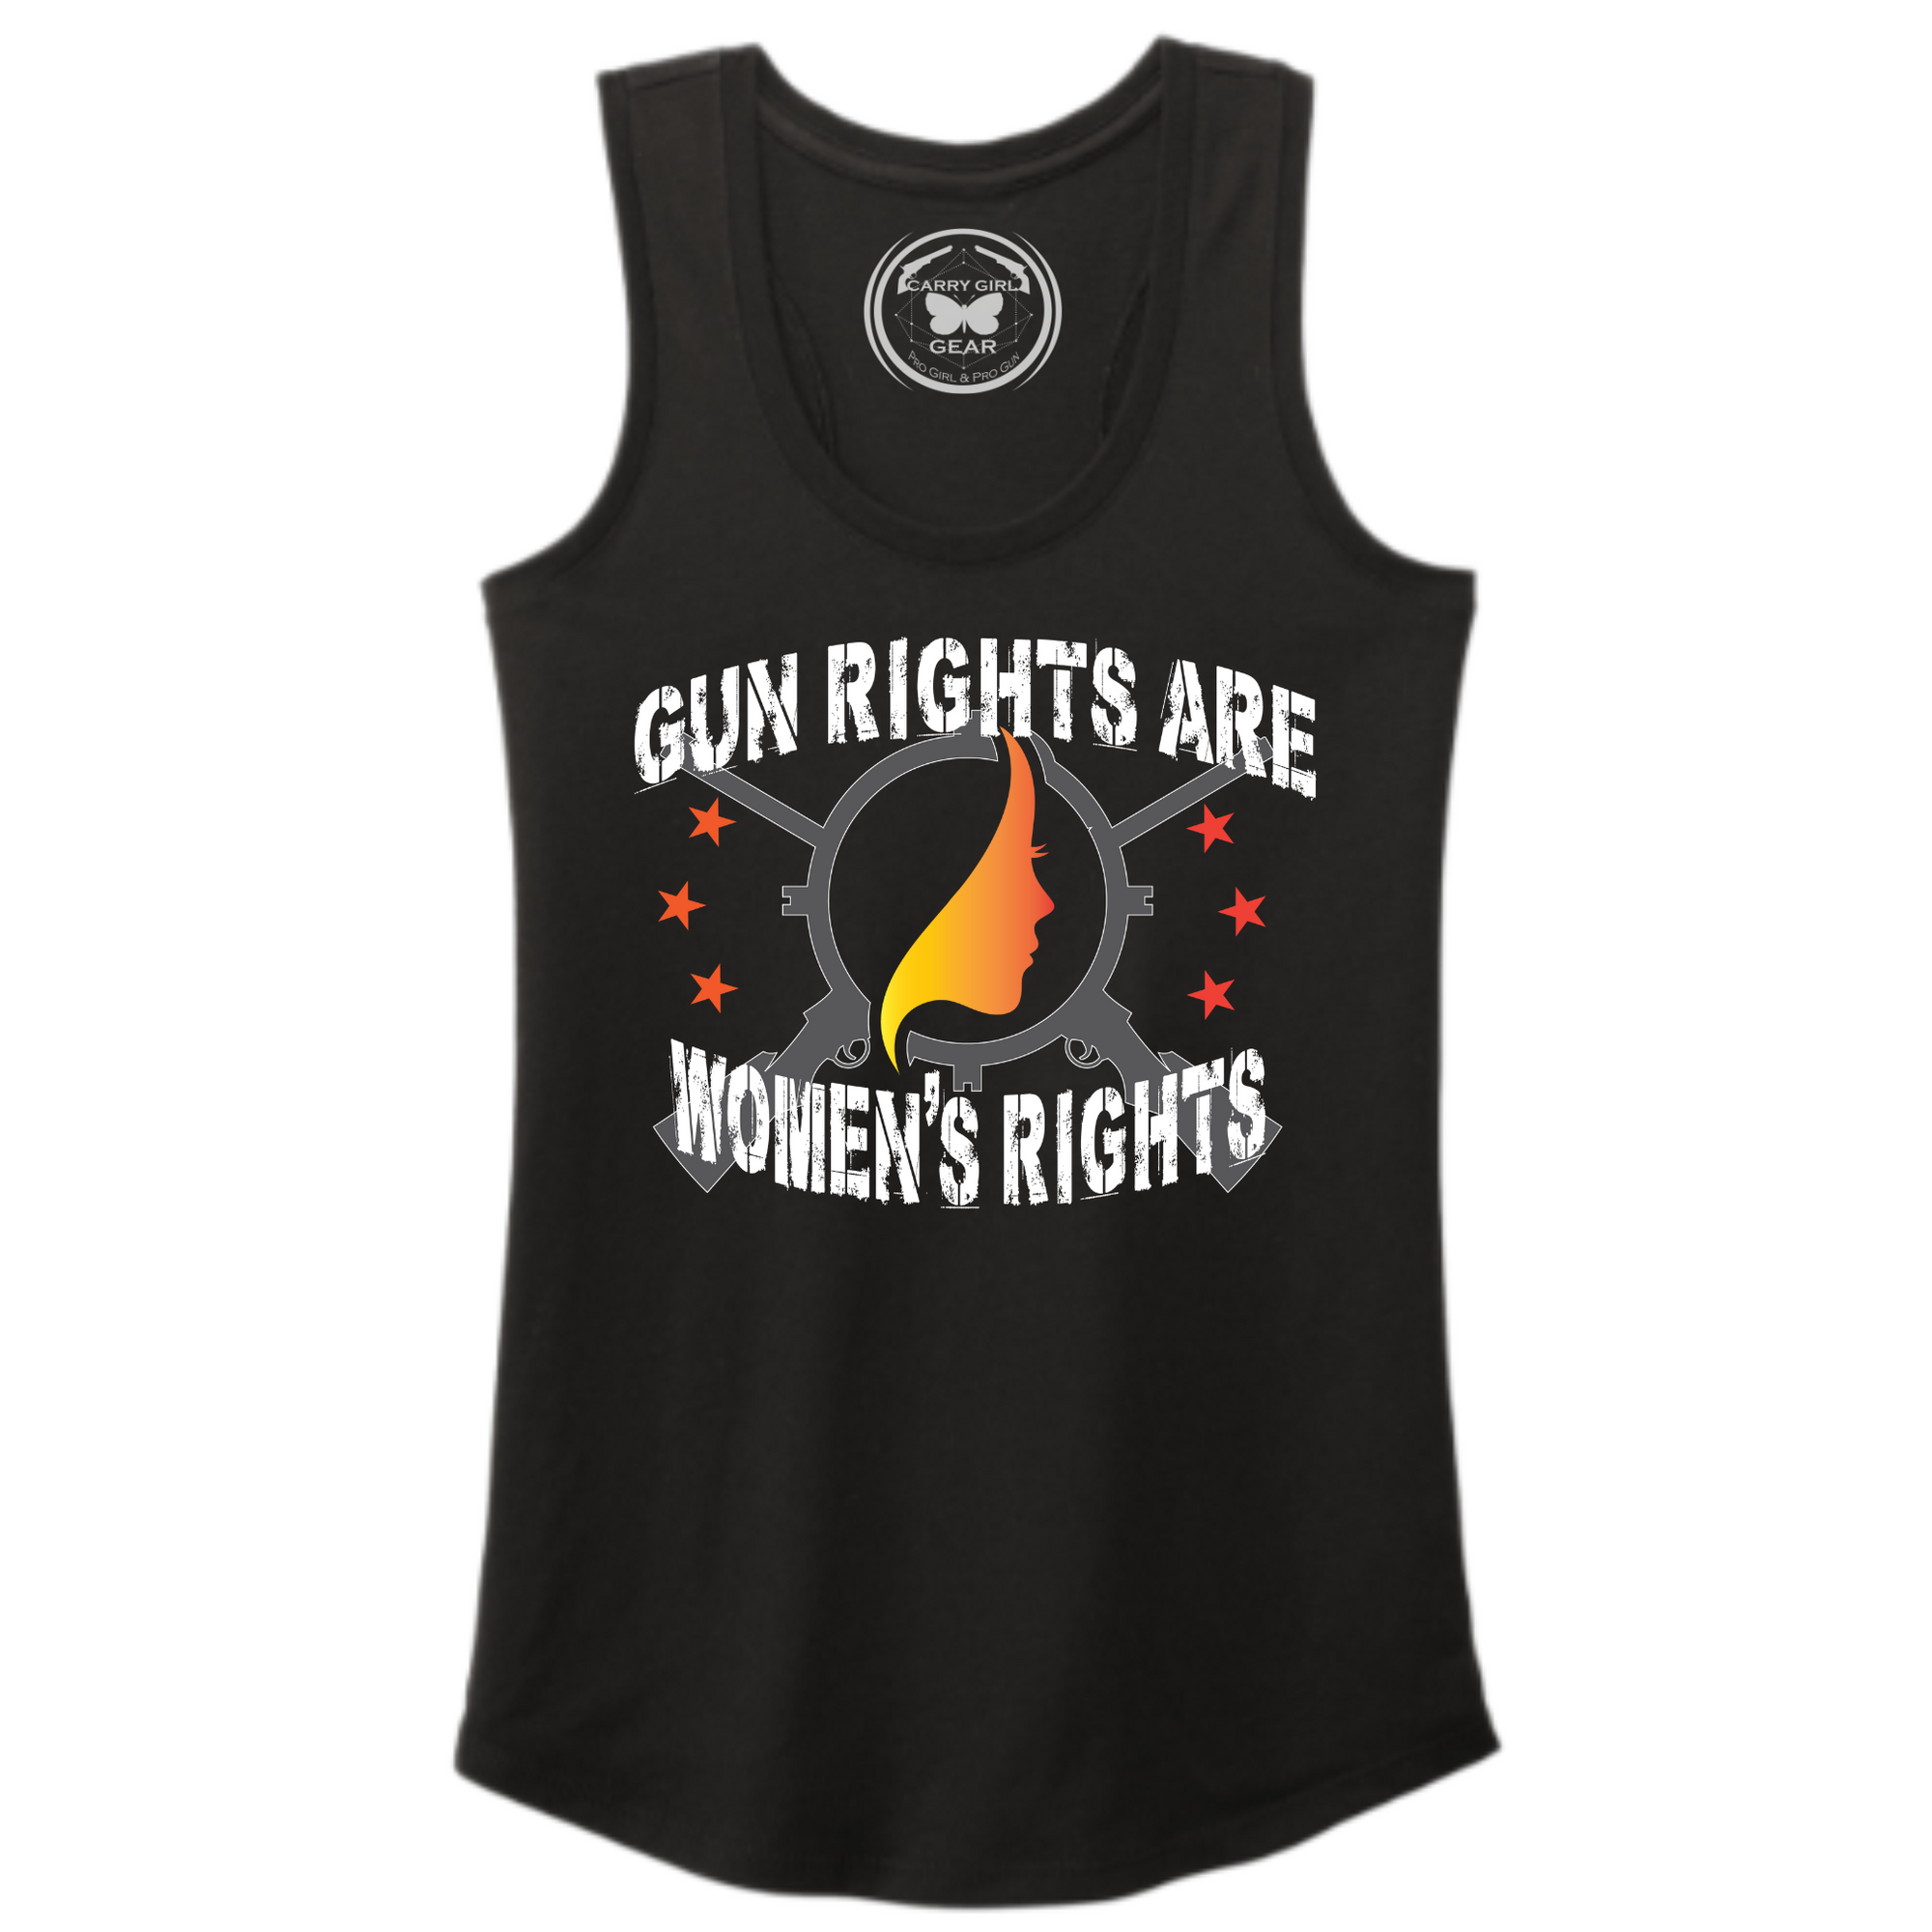 MY RIGHTS TANK TOP